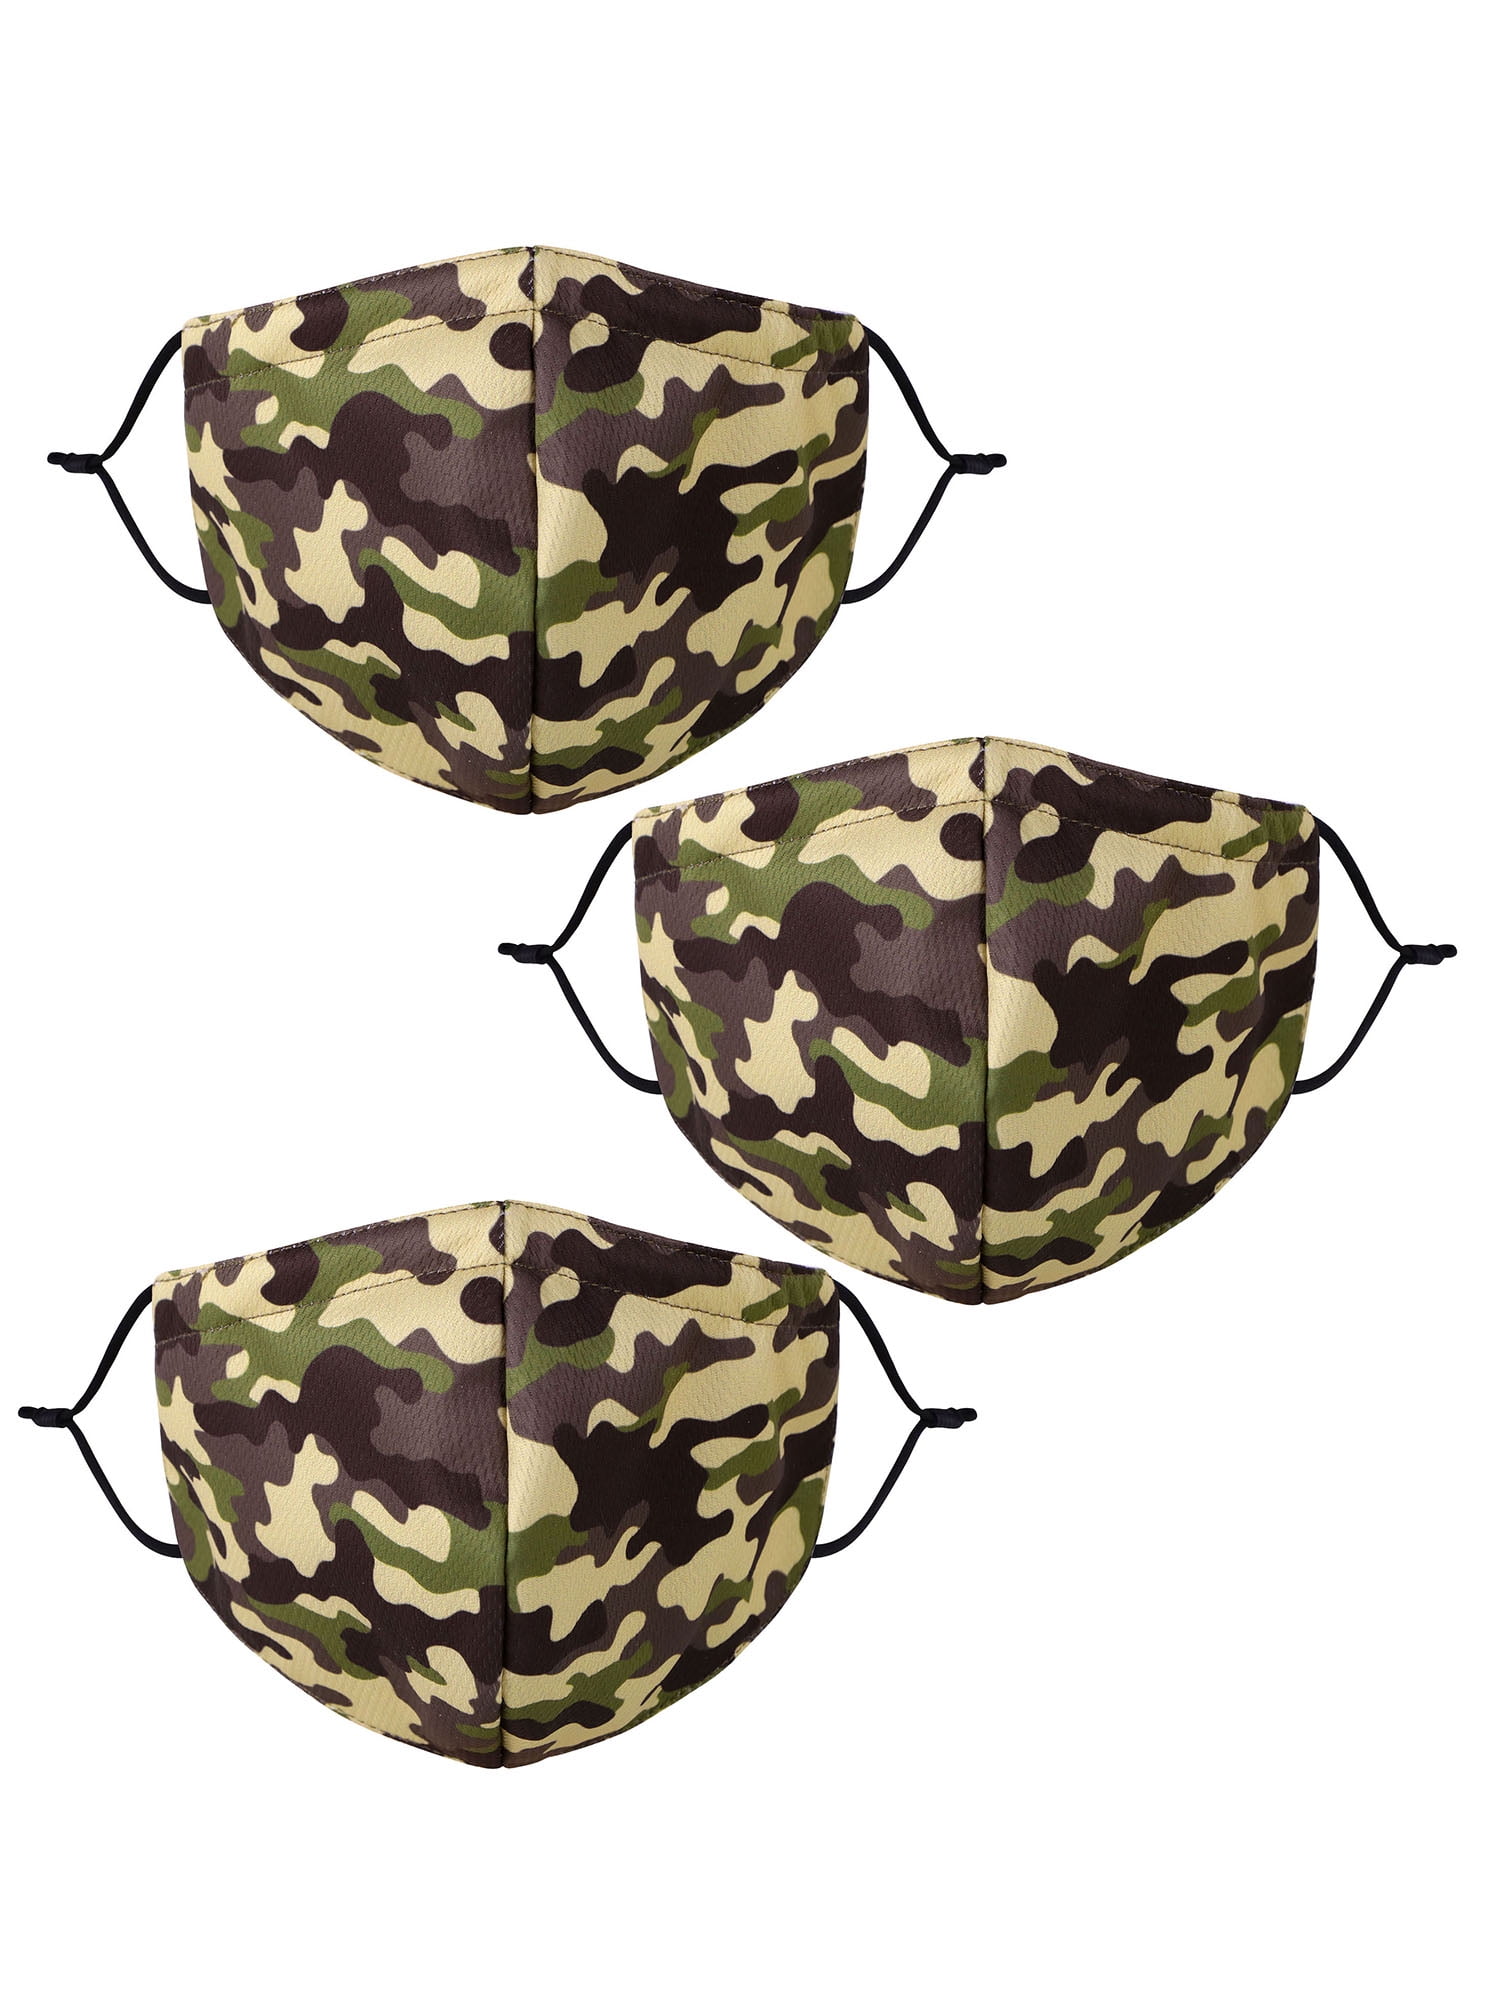 Details about   Bundle Of 12 Camouflage Fabric Face Masks Reusable And Washable 3 Layers 